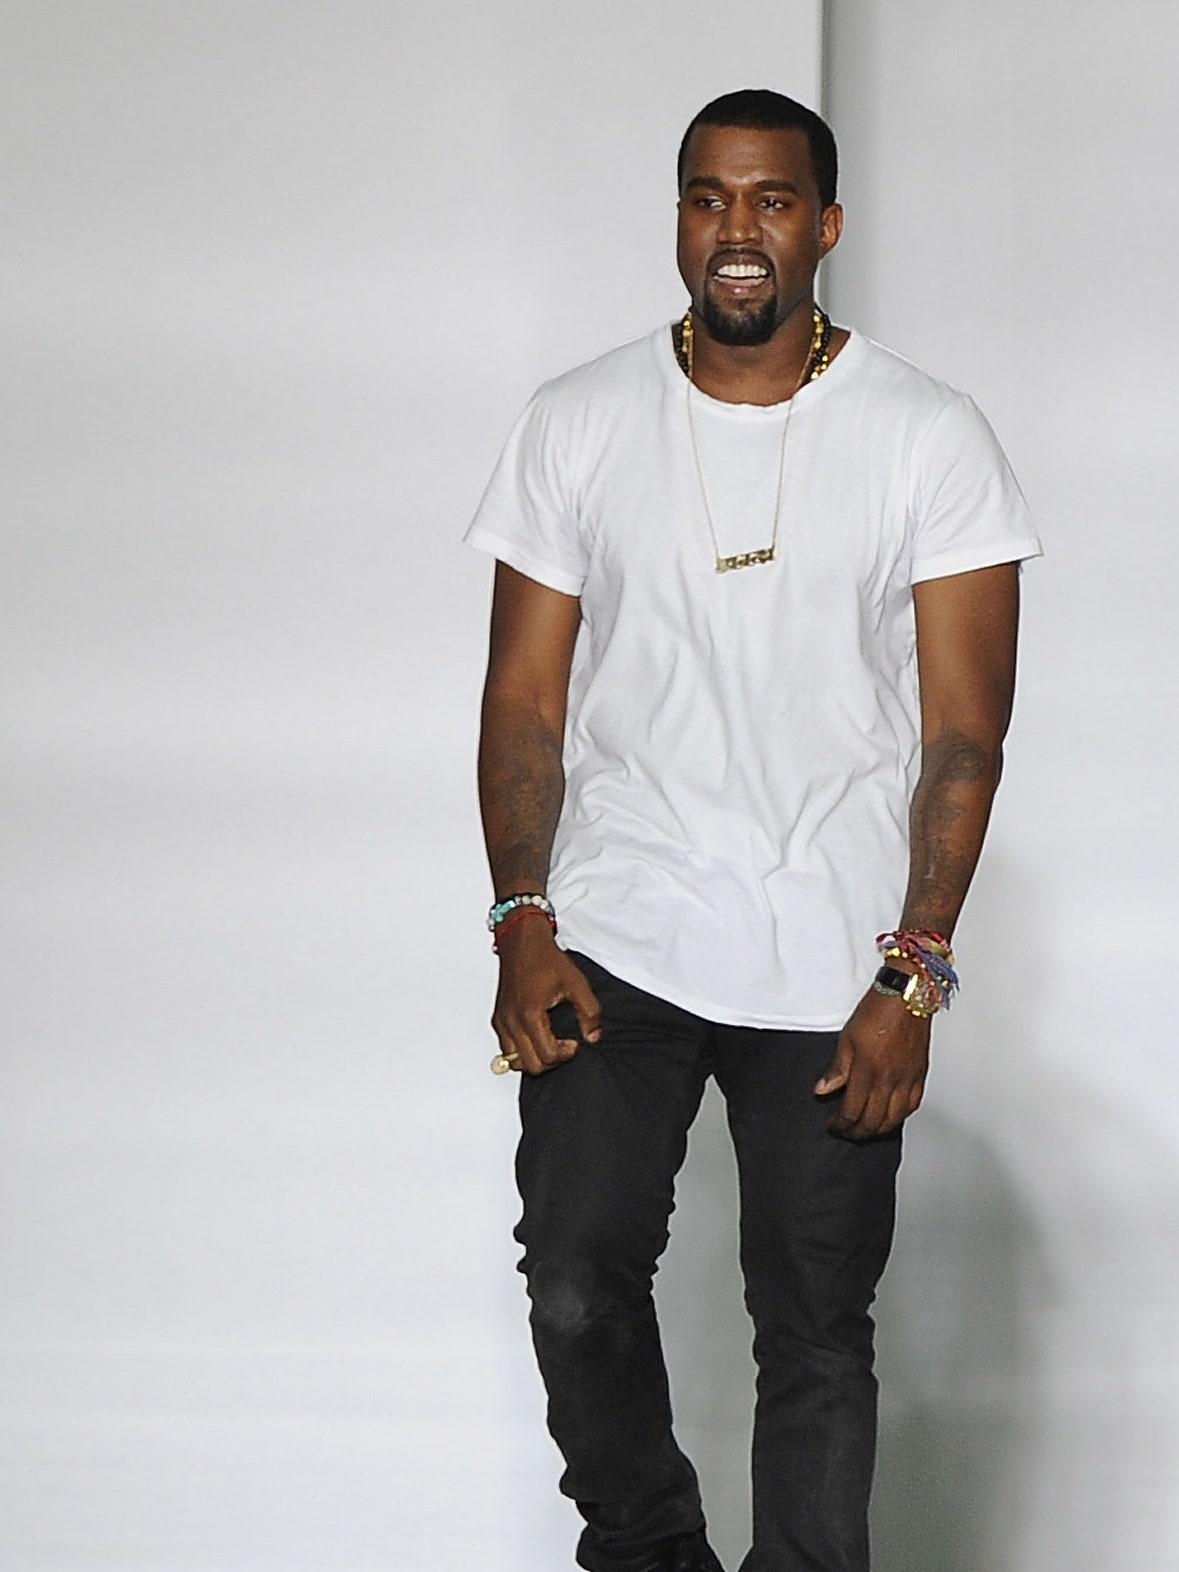 We already have a first look at the clothing collection Kanye West designed for GAP!